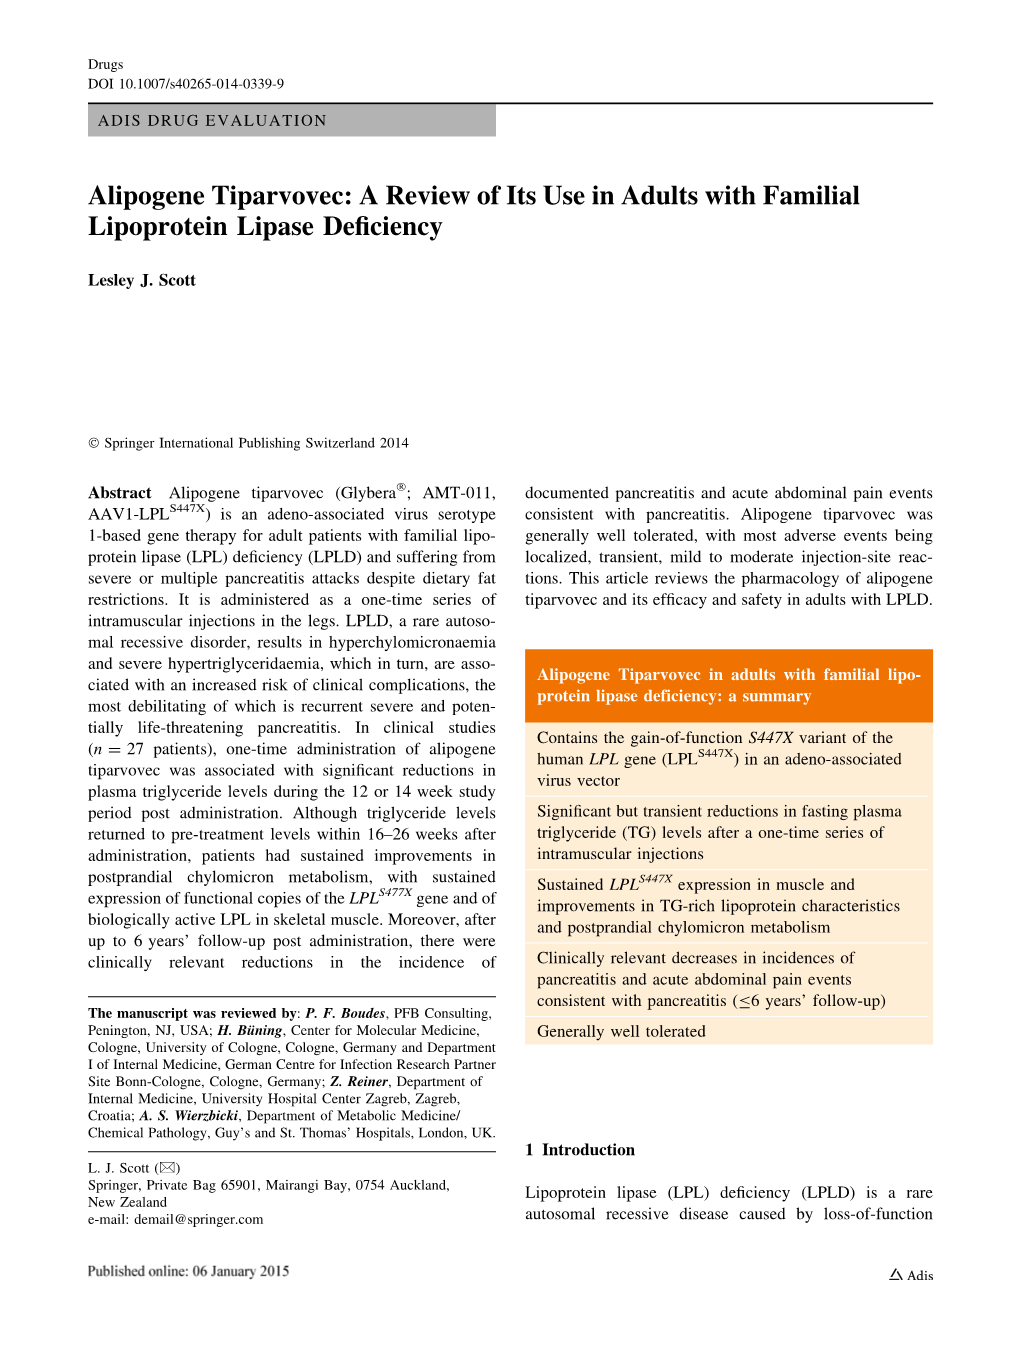 Alipogene Tiparvovec: a Review of Its Use in Adults with Familial Lipoprotein Lipase Deﬁciency